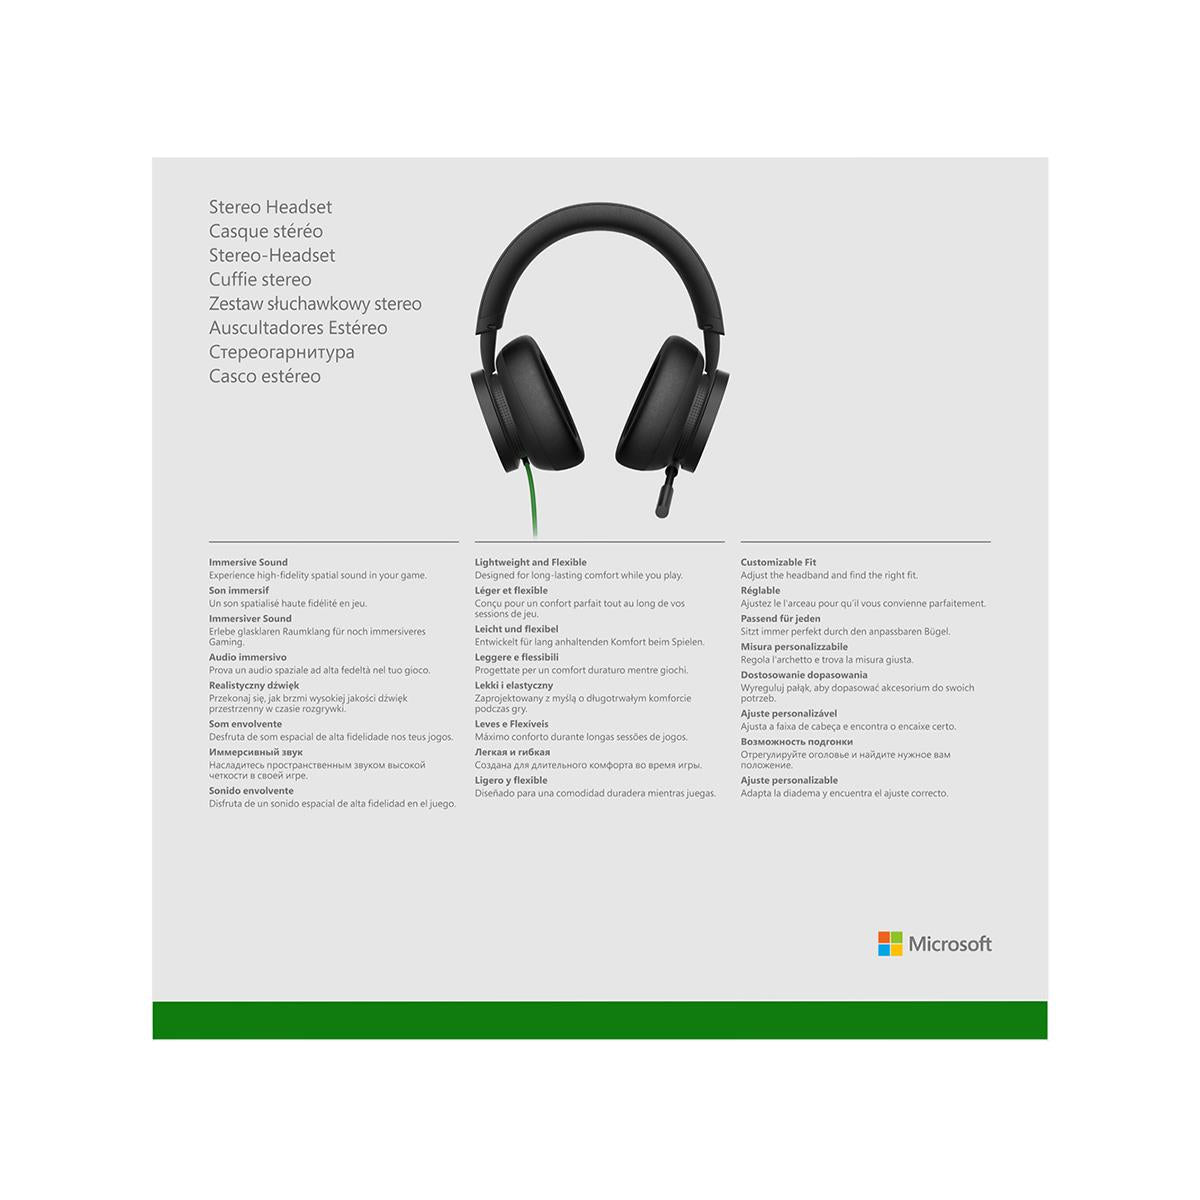 Xbox Wired Headset - Black